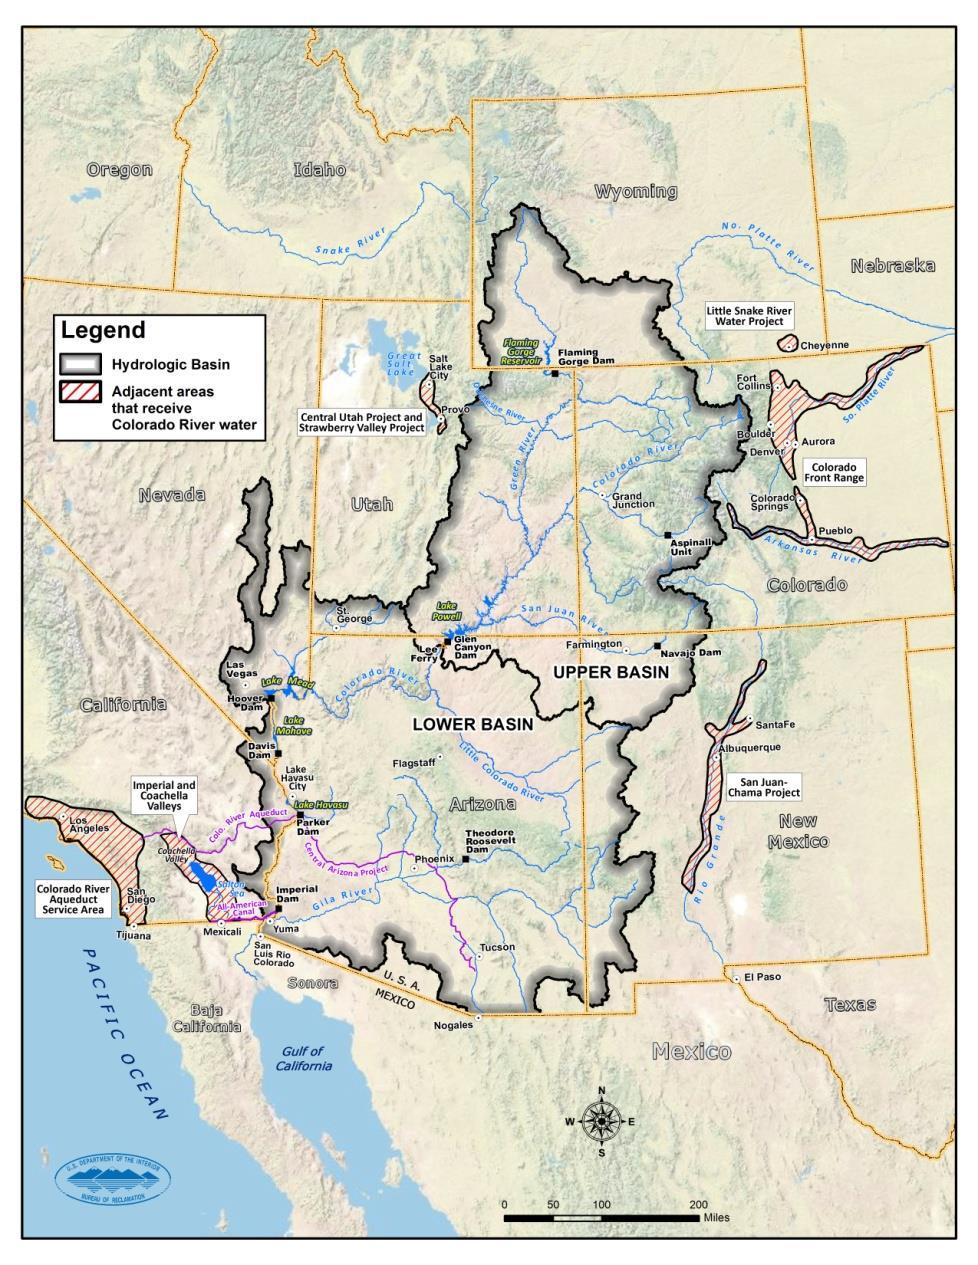 Colorado River Basin Water Supply and Demand Study Study Objectives: Assess future water supply and demand imbalances over the next 50 years Develop and evaluate opportunities for resolving